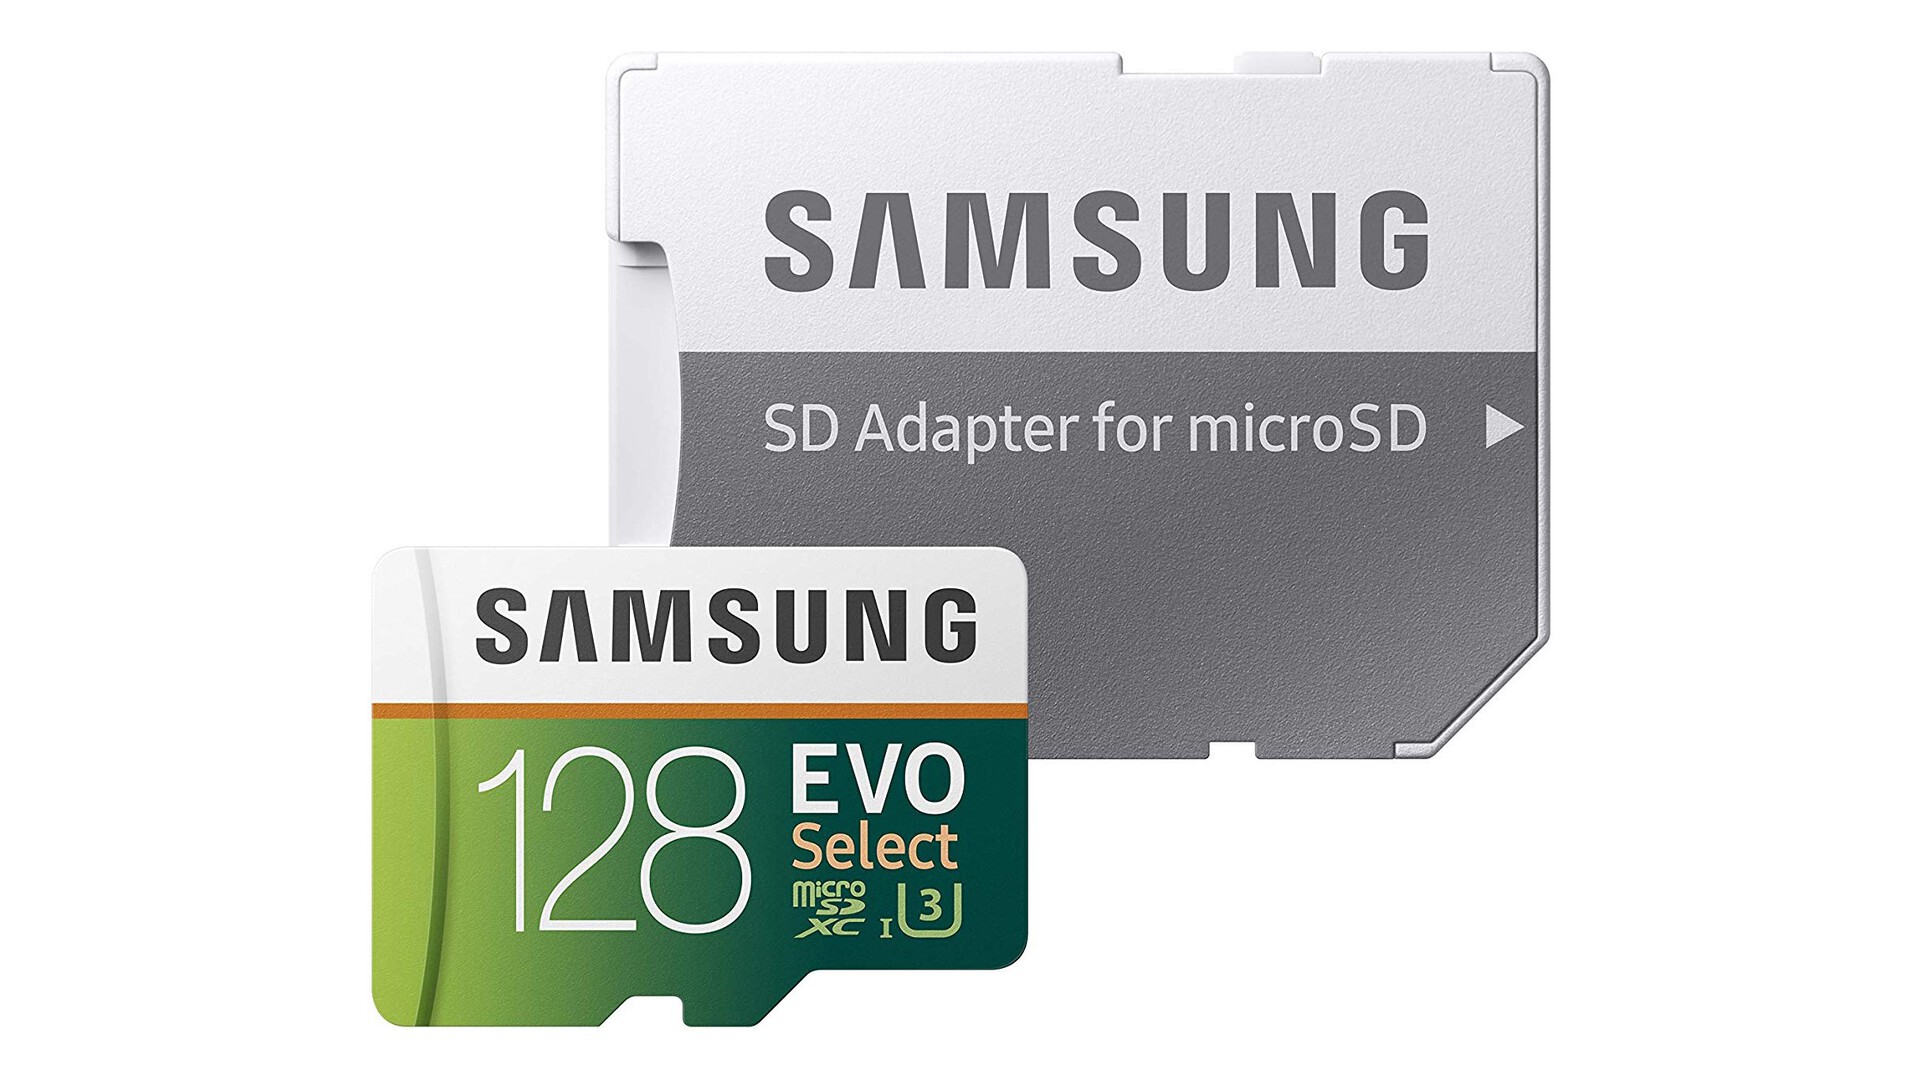 Samsung 128GB MicroSDXC Evo Select Memory Card with Adapter - Photography Essentials. 